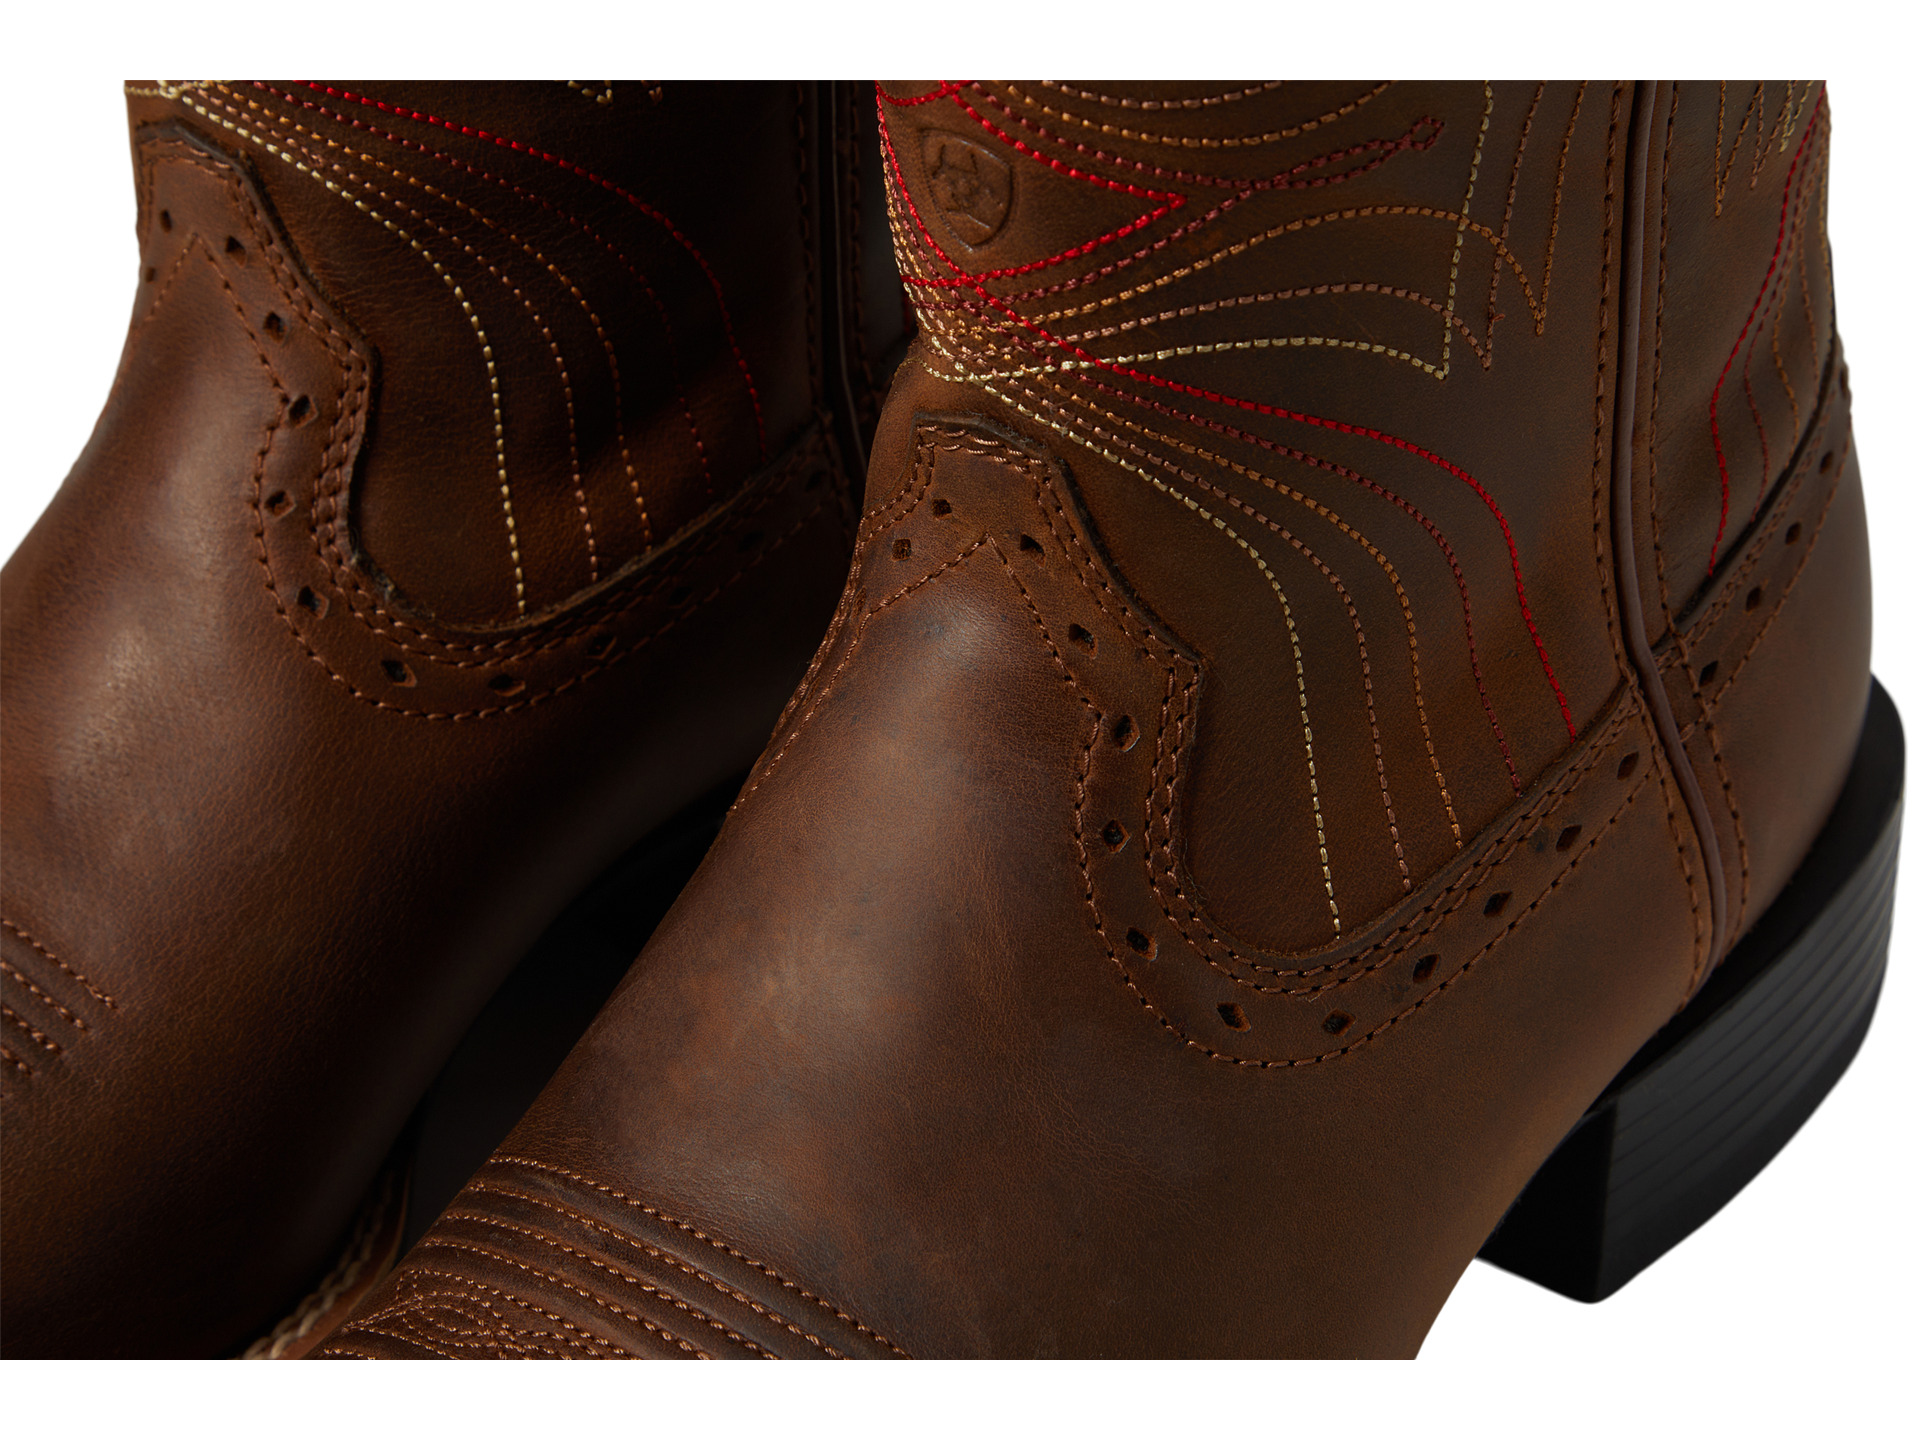 Ariat Sport Wide Square Toe at Zappos.com